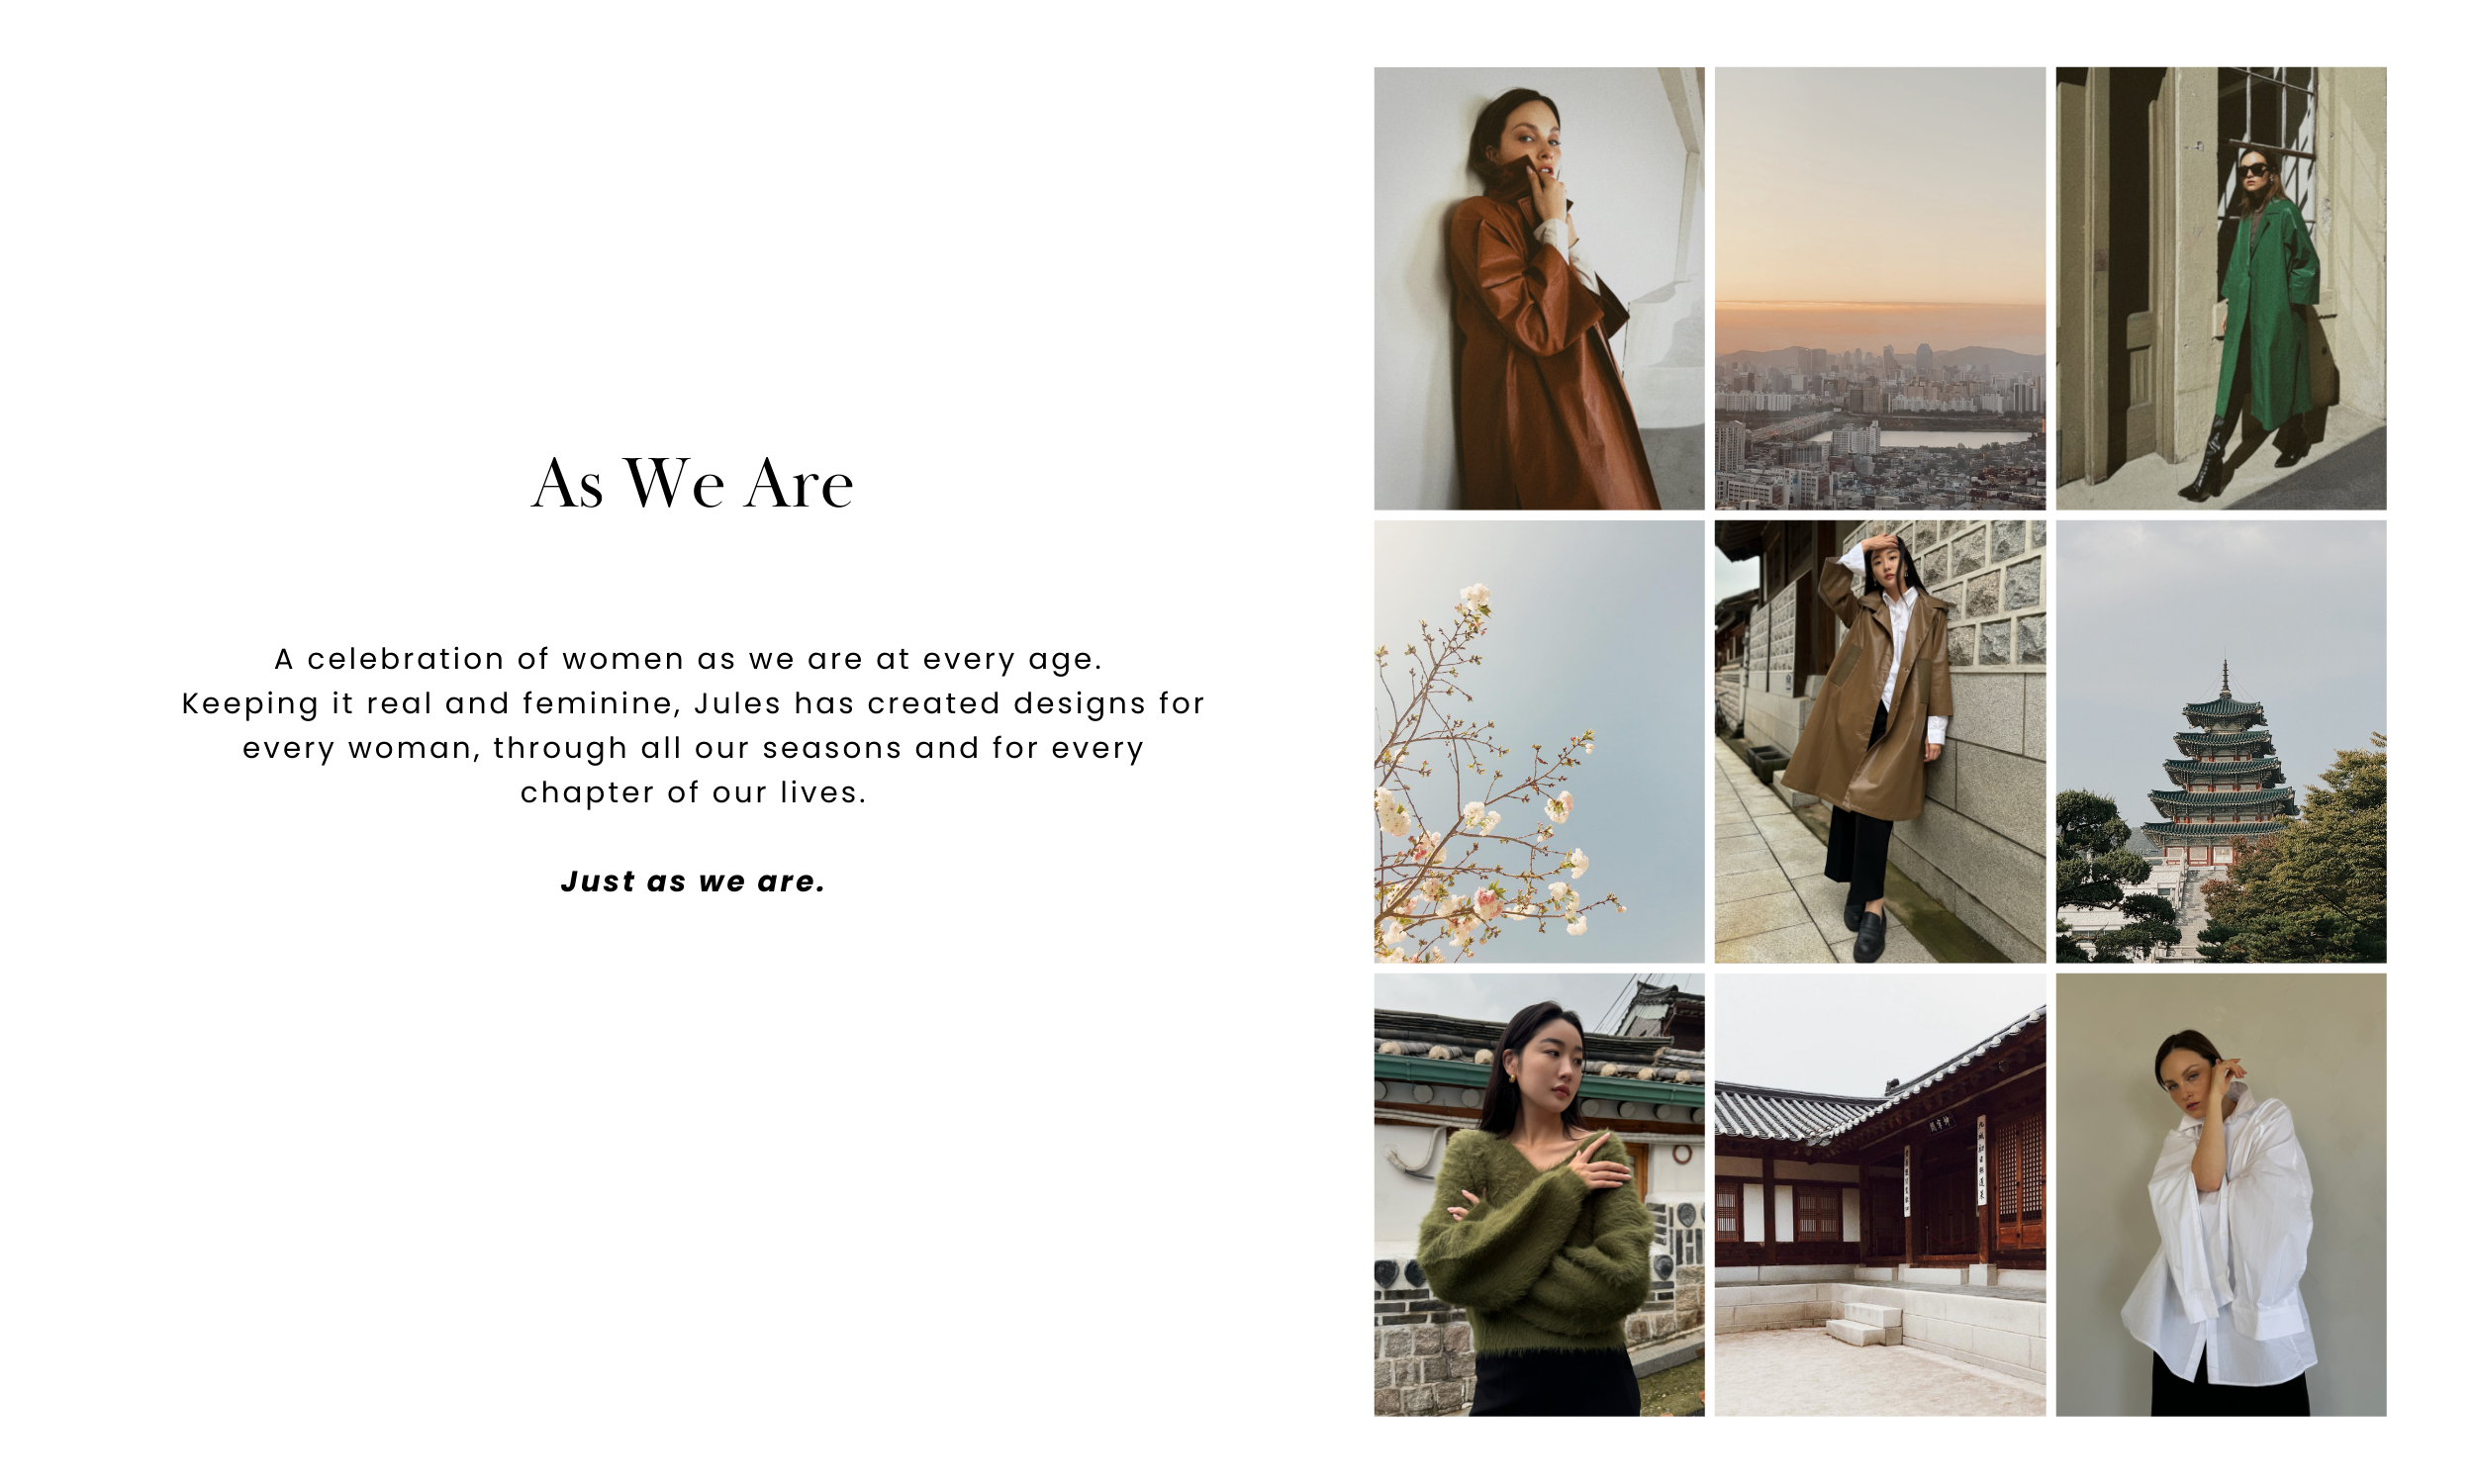 As We Are.  A celebration of women as we are at every age.  Keeping it real and feminine, Jules has created designs for every woman, through all our seasons and for every chapter of our lives.  Just as we are.